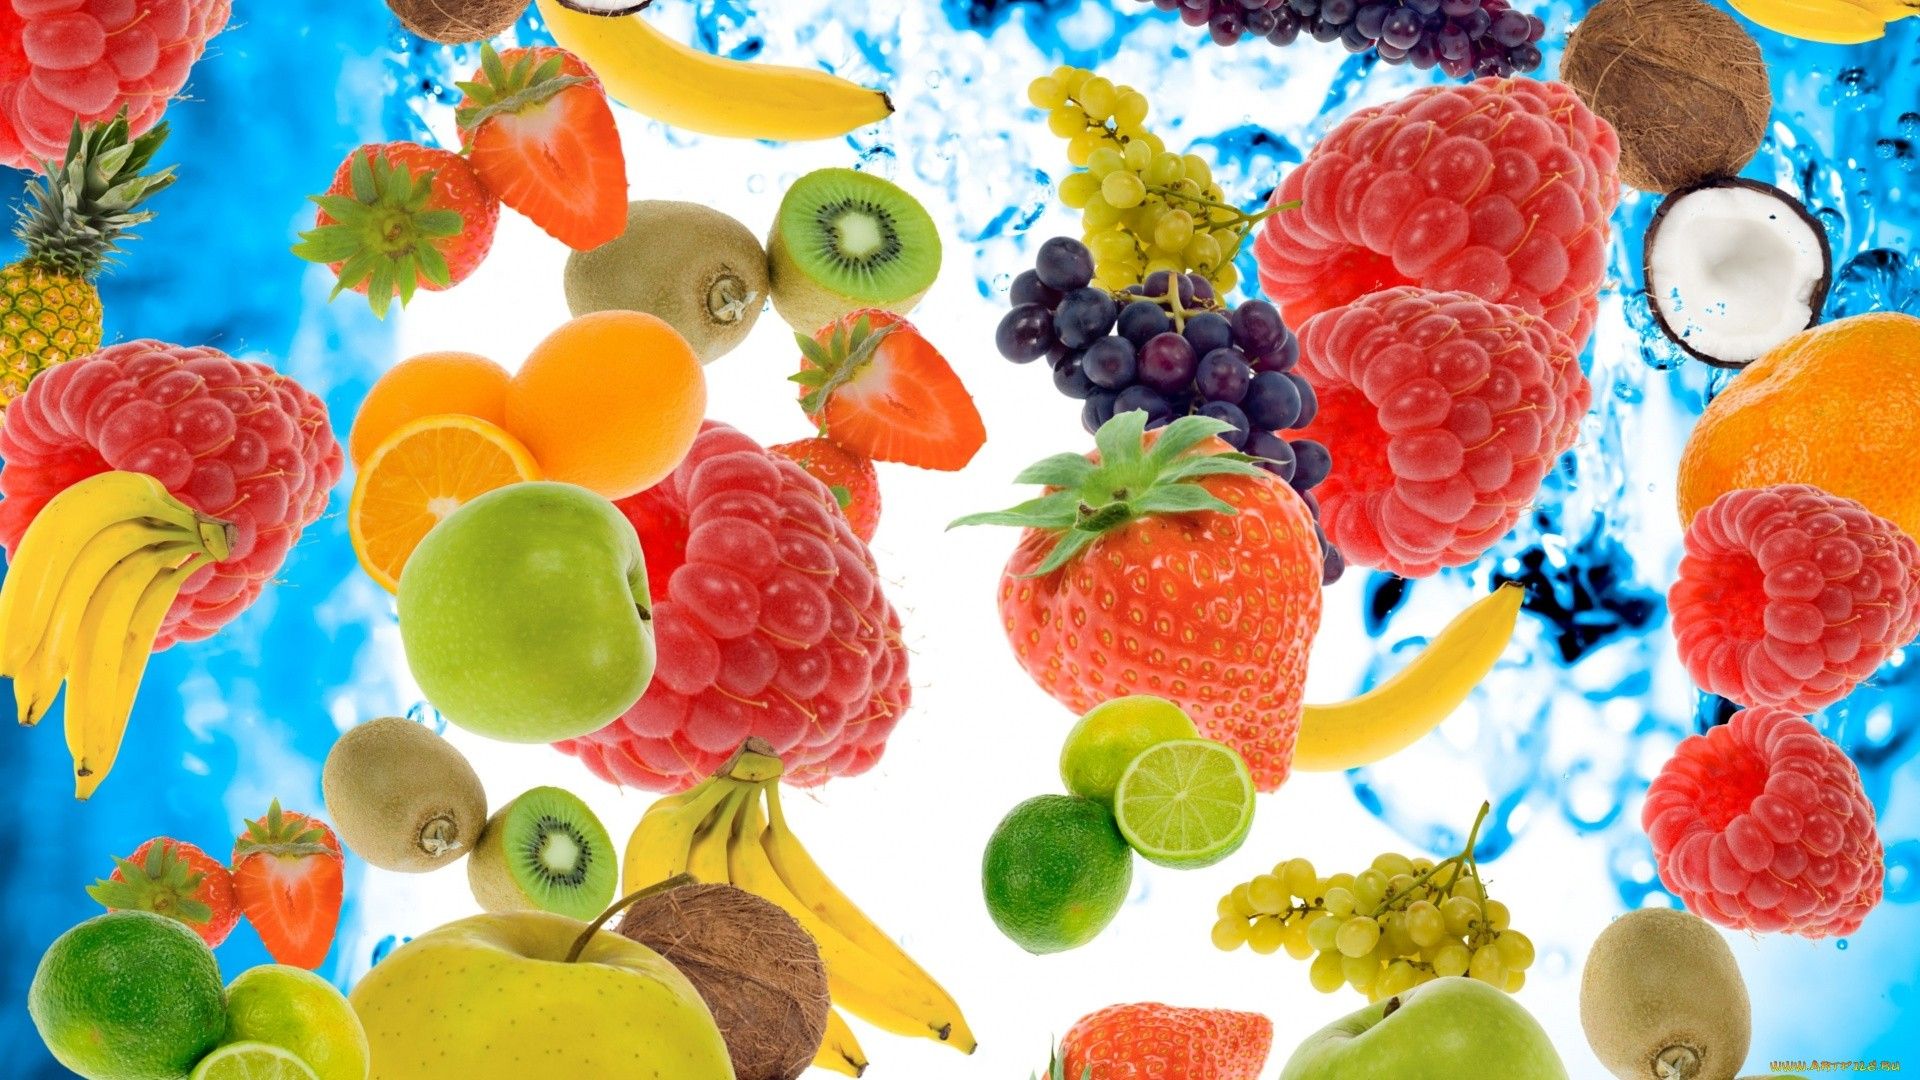 Fruit Wallpaper: 25 Image, Other Category